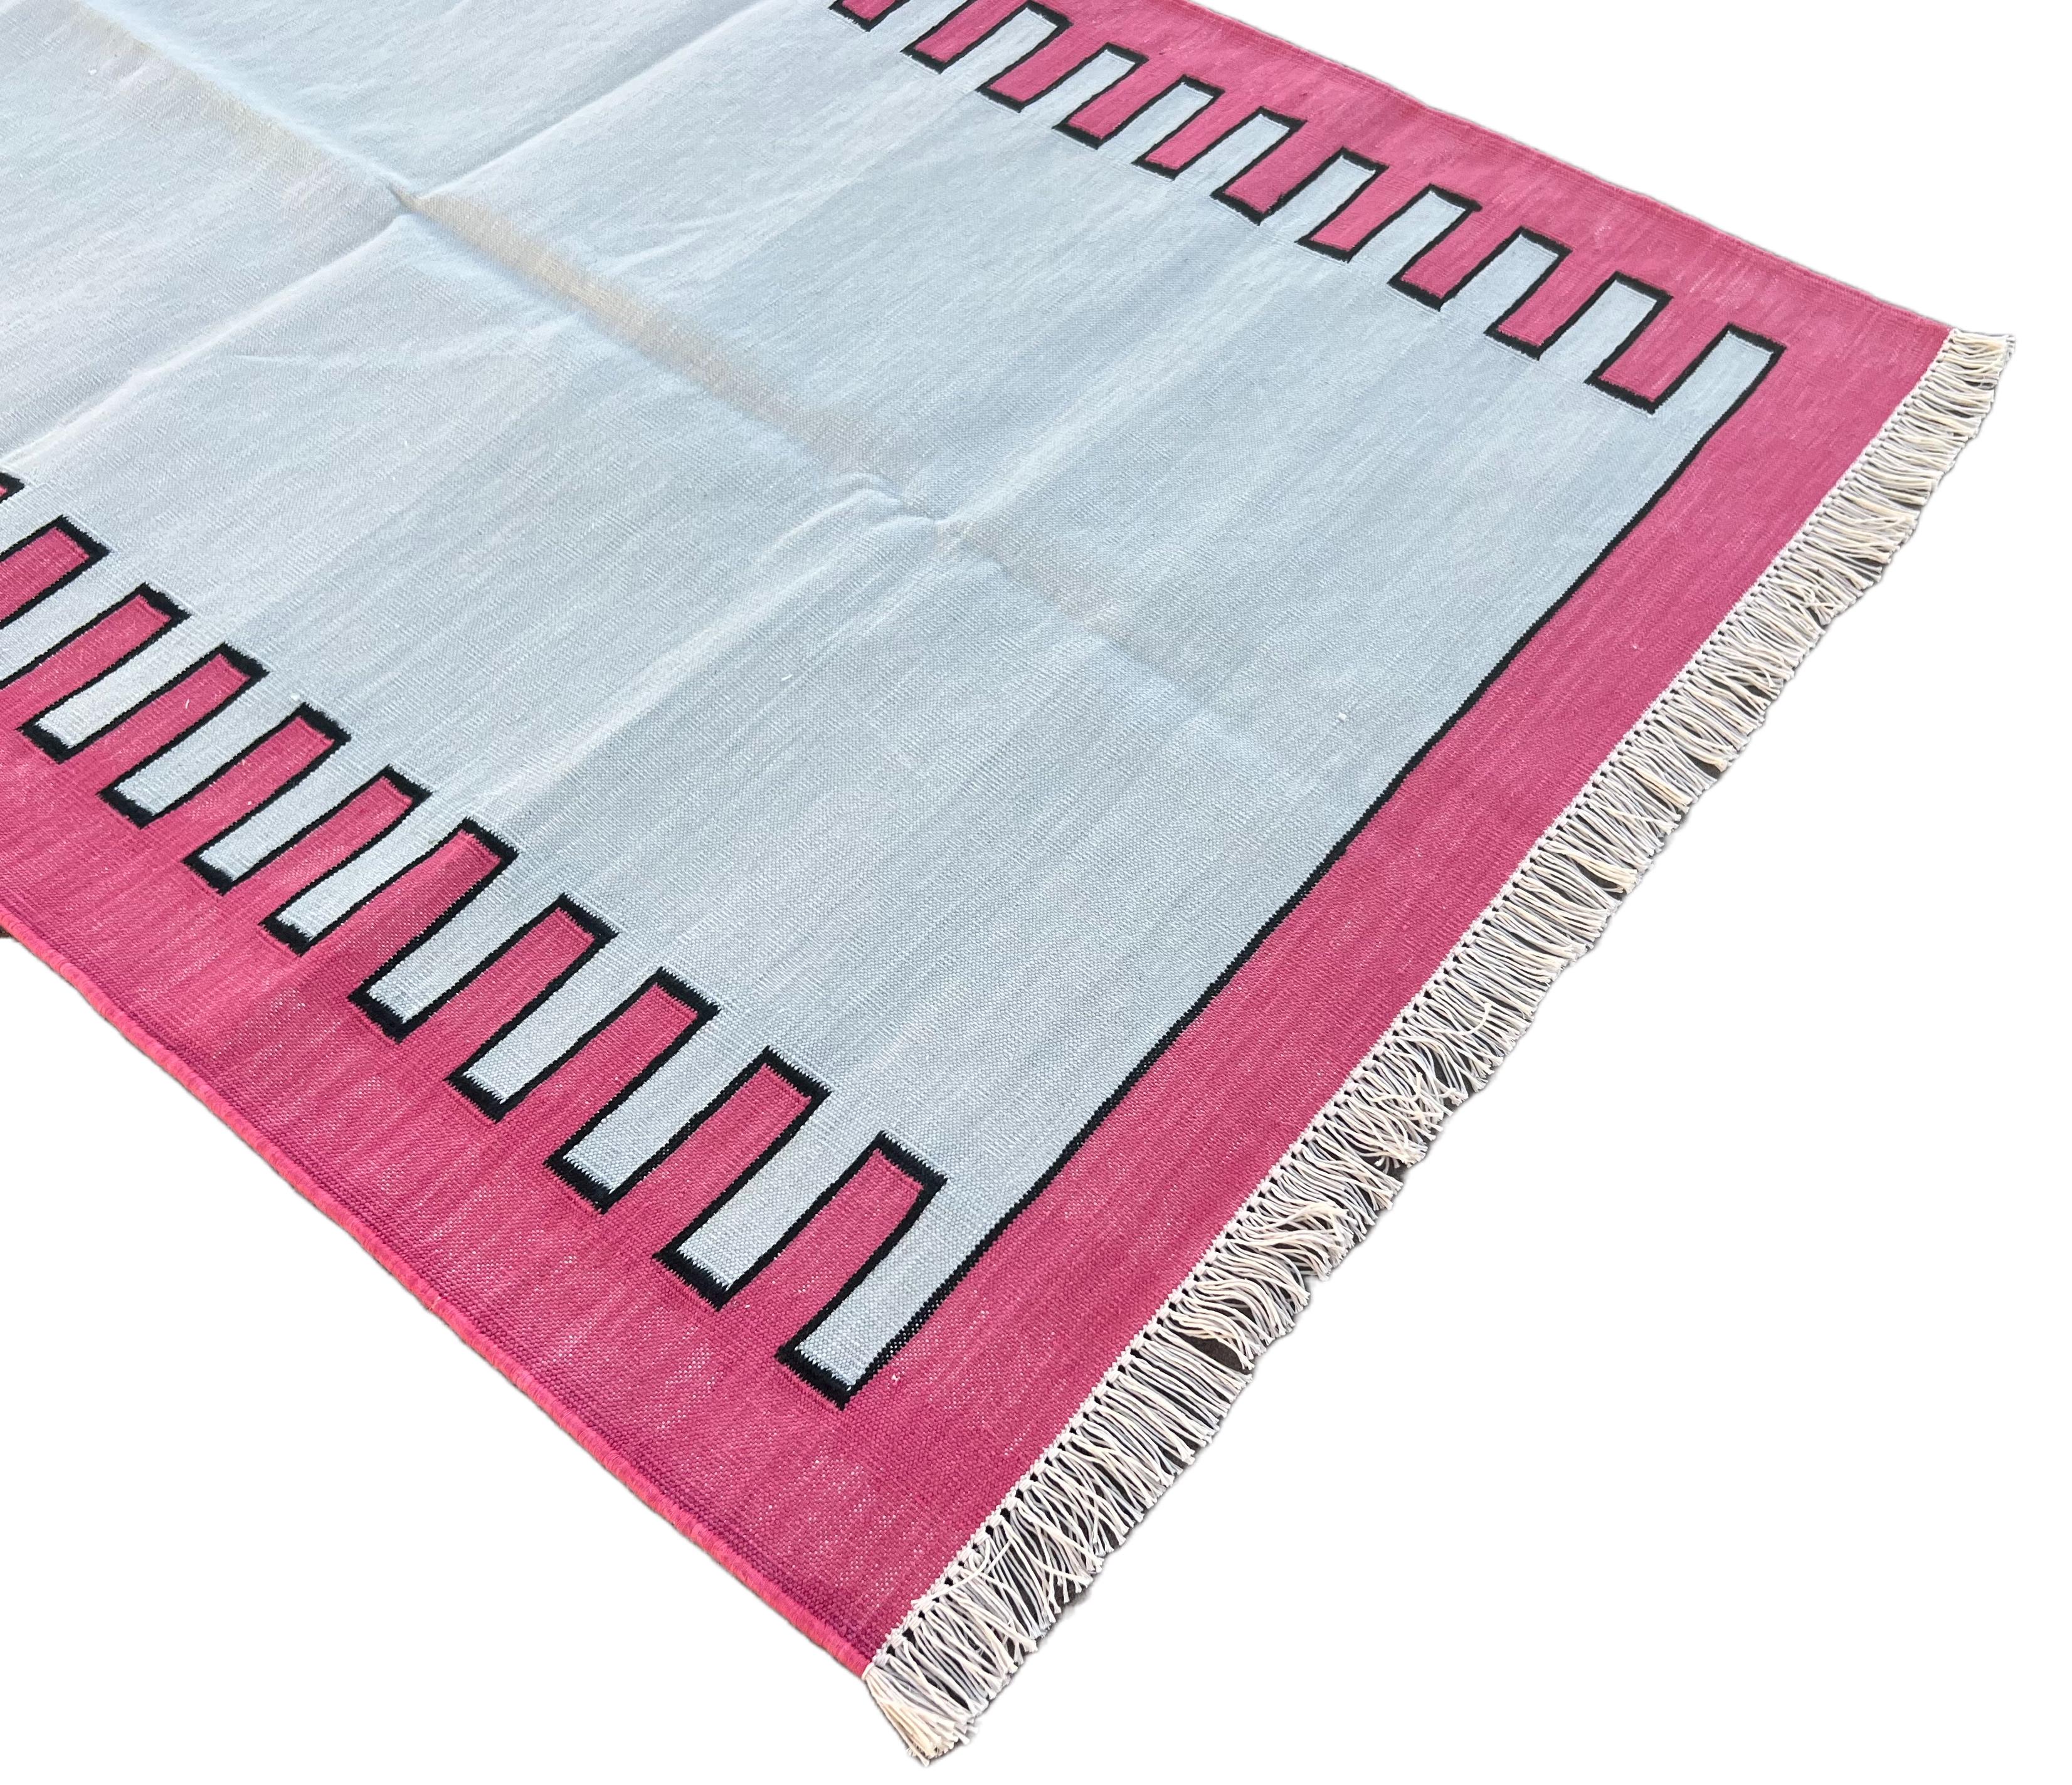 Hand-Woven Handmade Cotton Area Flat Weave Rug, 3x5 Blue And Pink Striped Indian Dhurrie For Sale